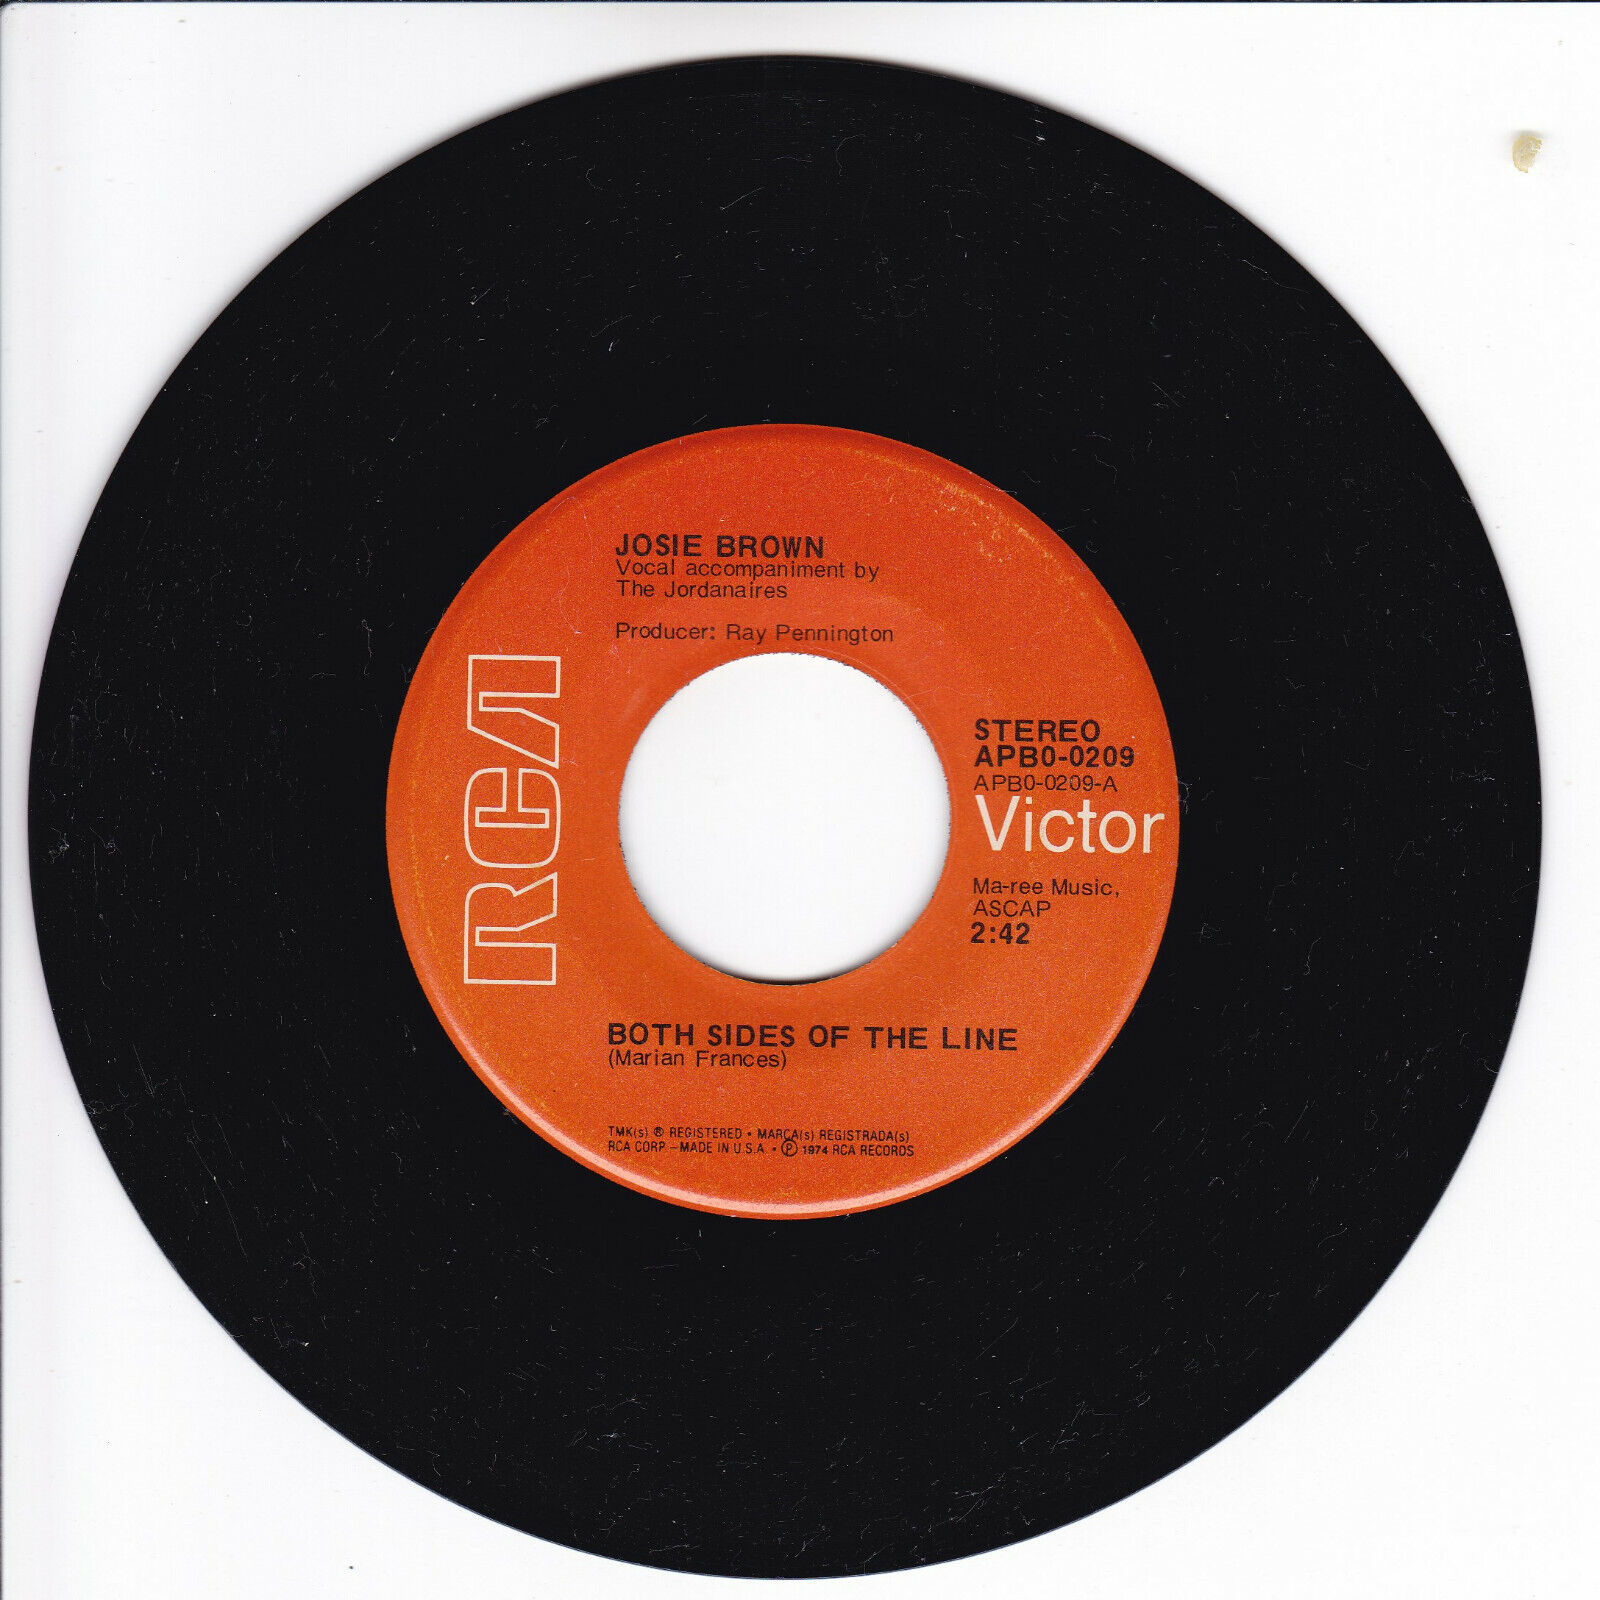 JOSIE BROWN Both Sides Of The Line VG(+) 45 RPM 